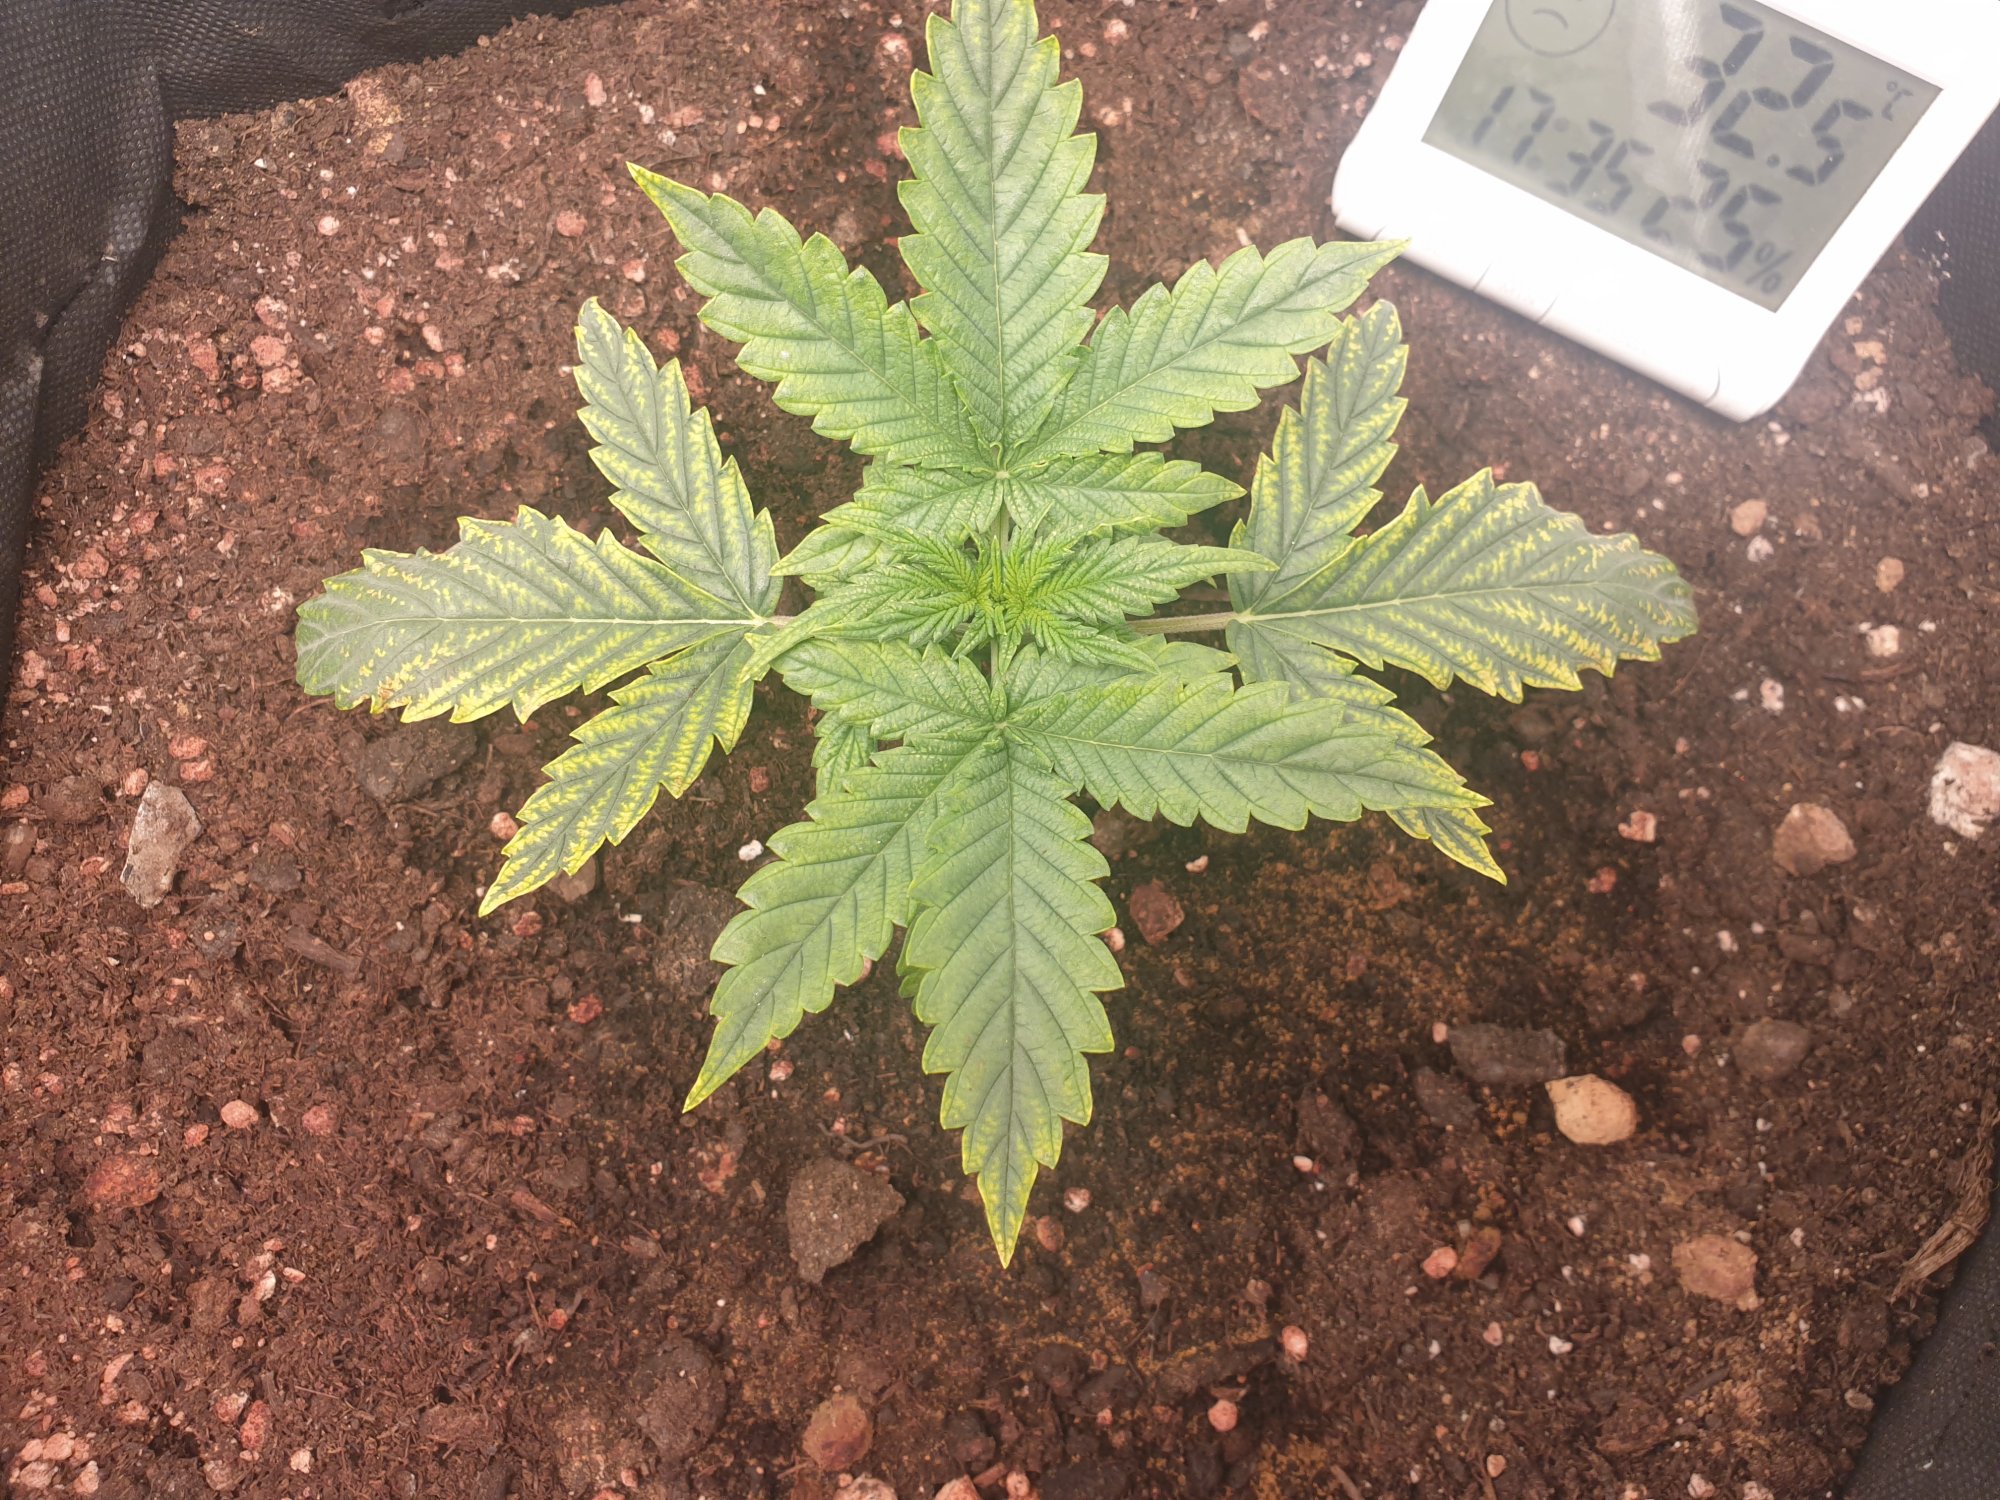 Leaf discolorization from early on why 2